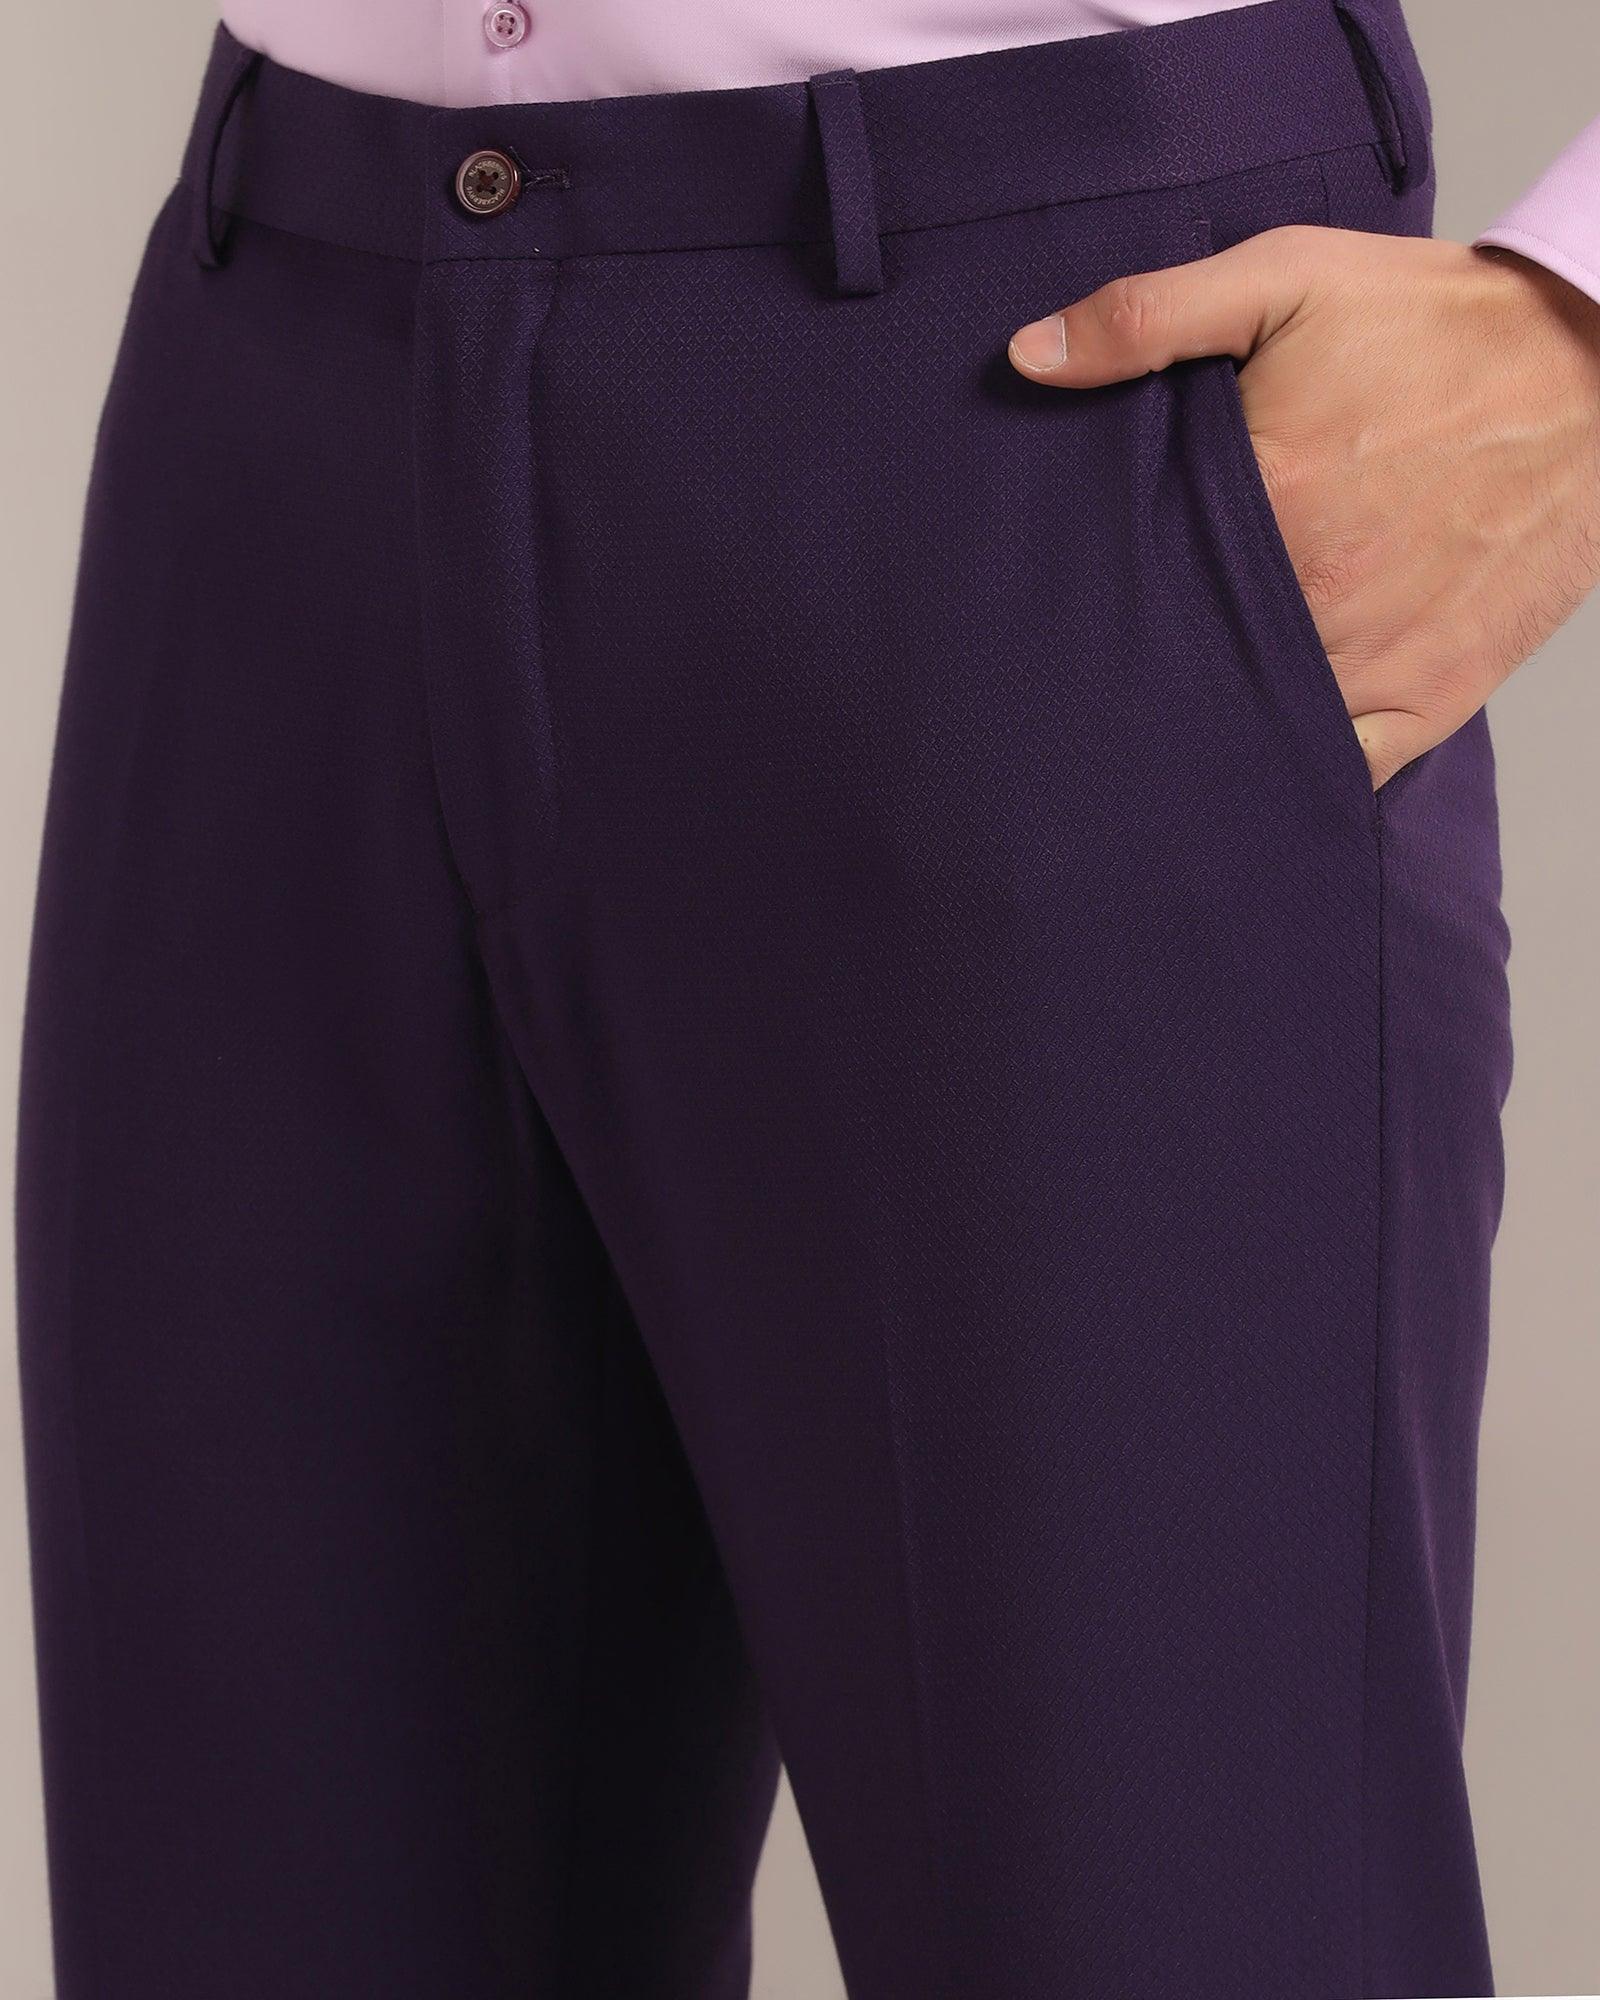 Buy Henry & Smith Dark Purple Stretch Washed Men Chino Pants at Amazon.in